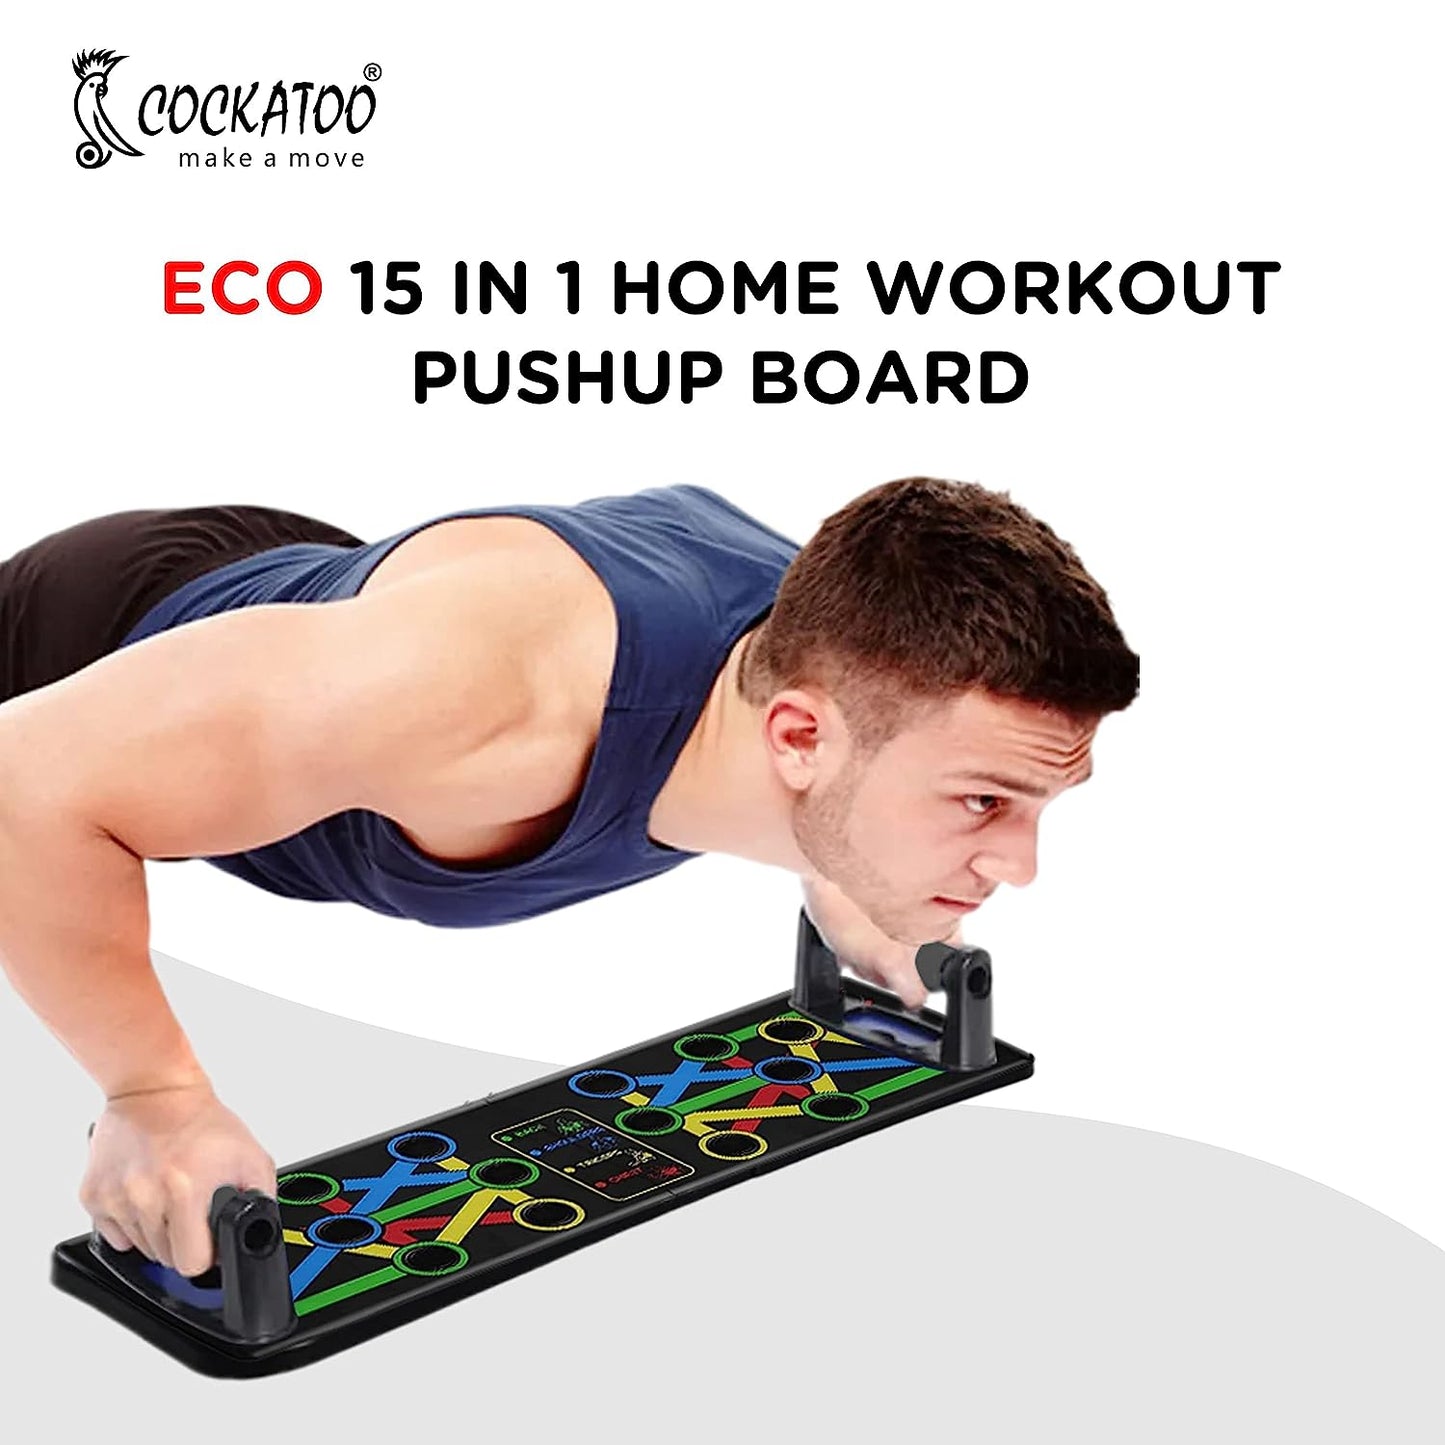 Cockatoo ECO 15 in 1 Home Workout Pushup Board,Pushup Bar System|| ABS Material|| 1 Year Warranty